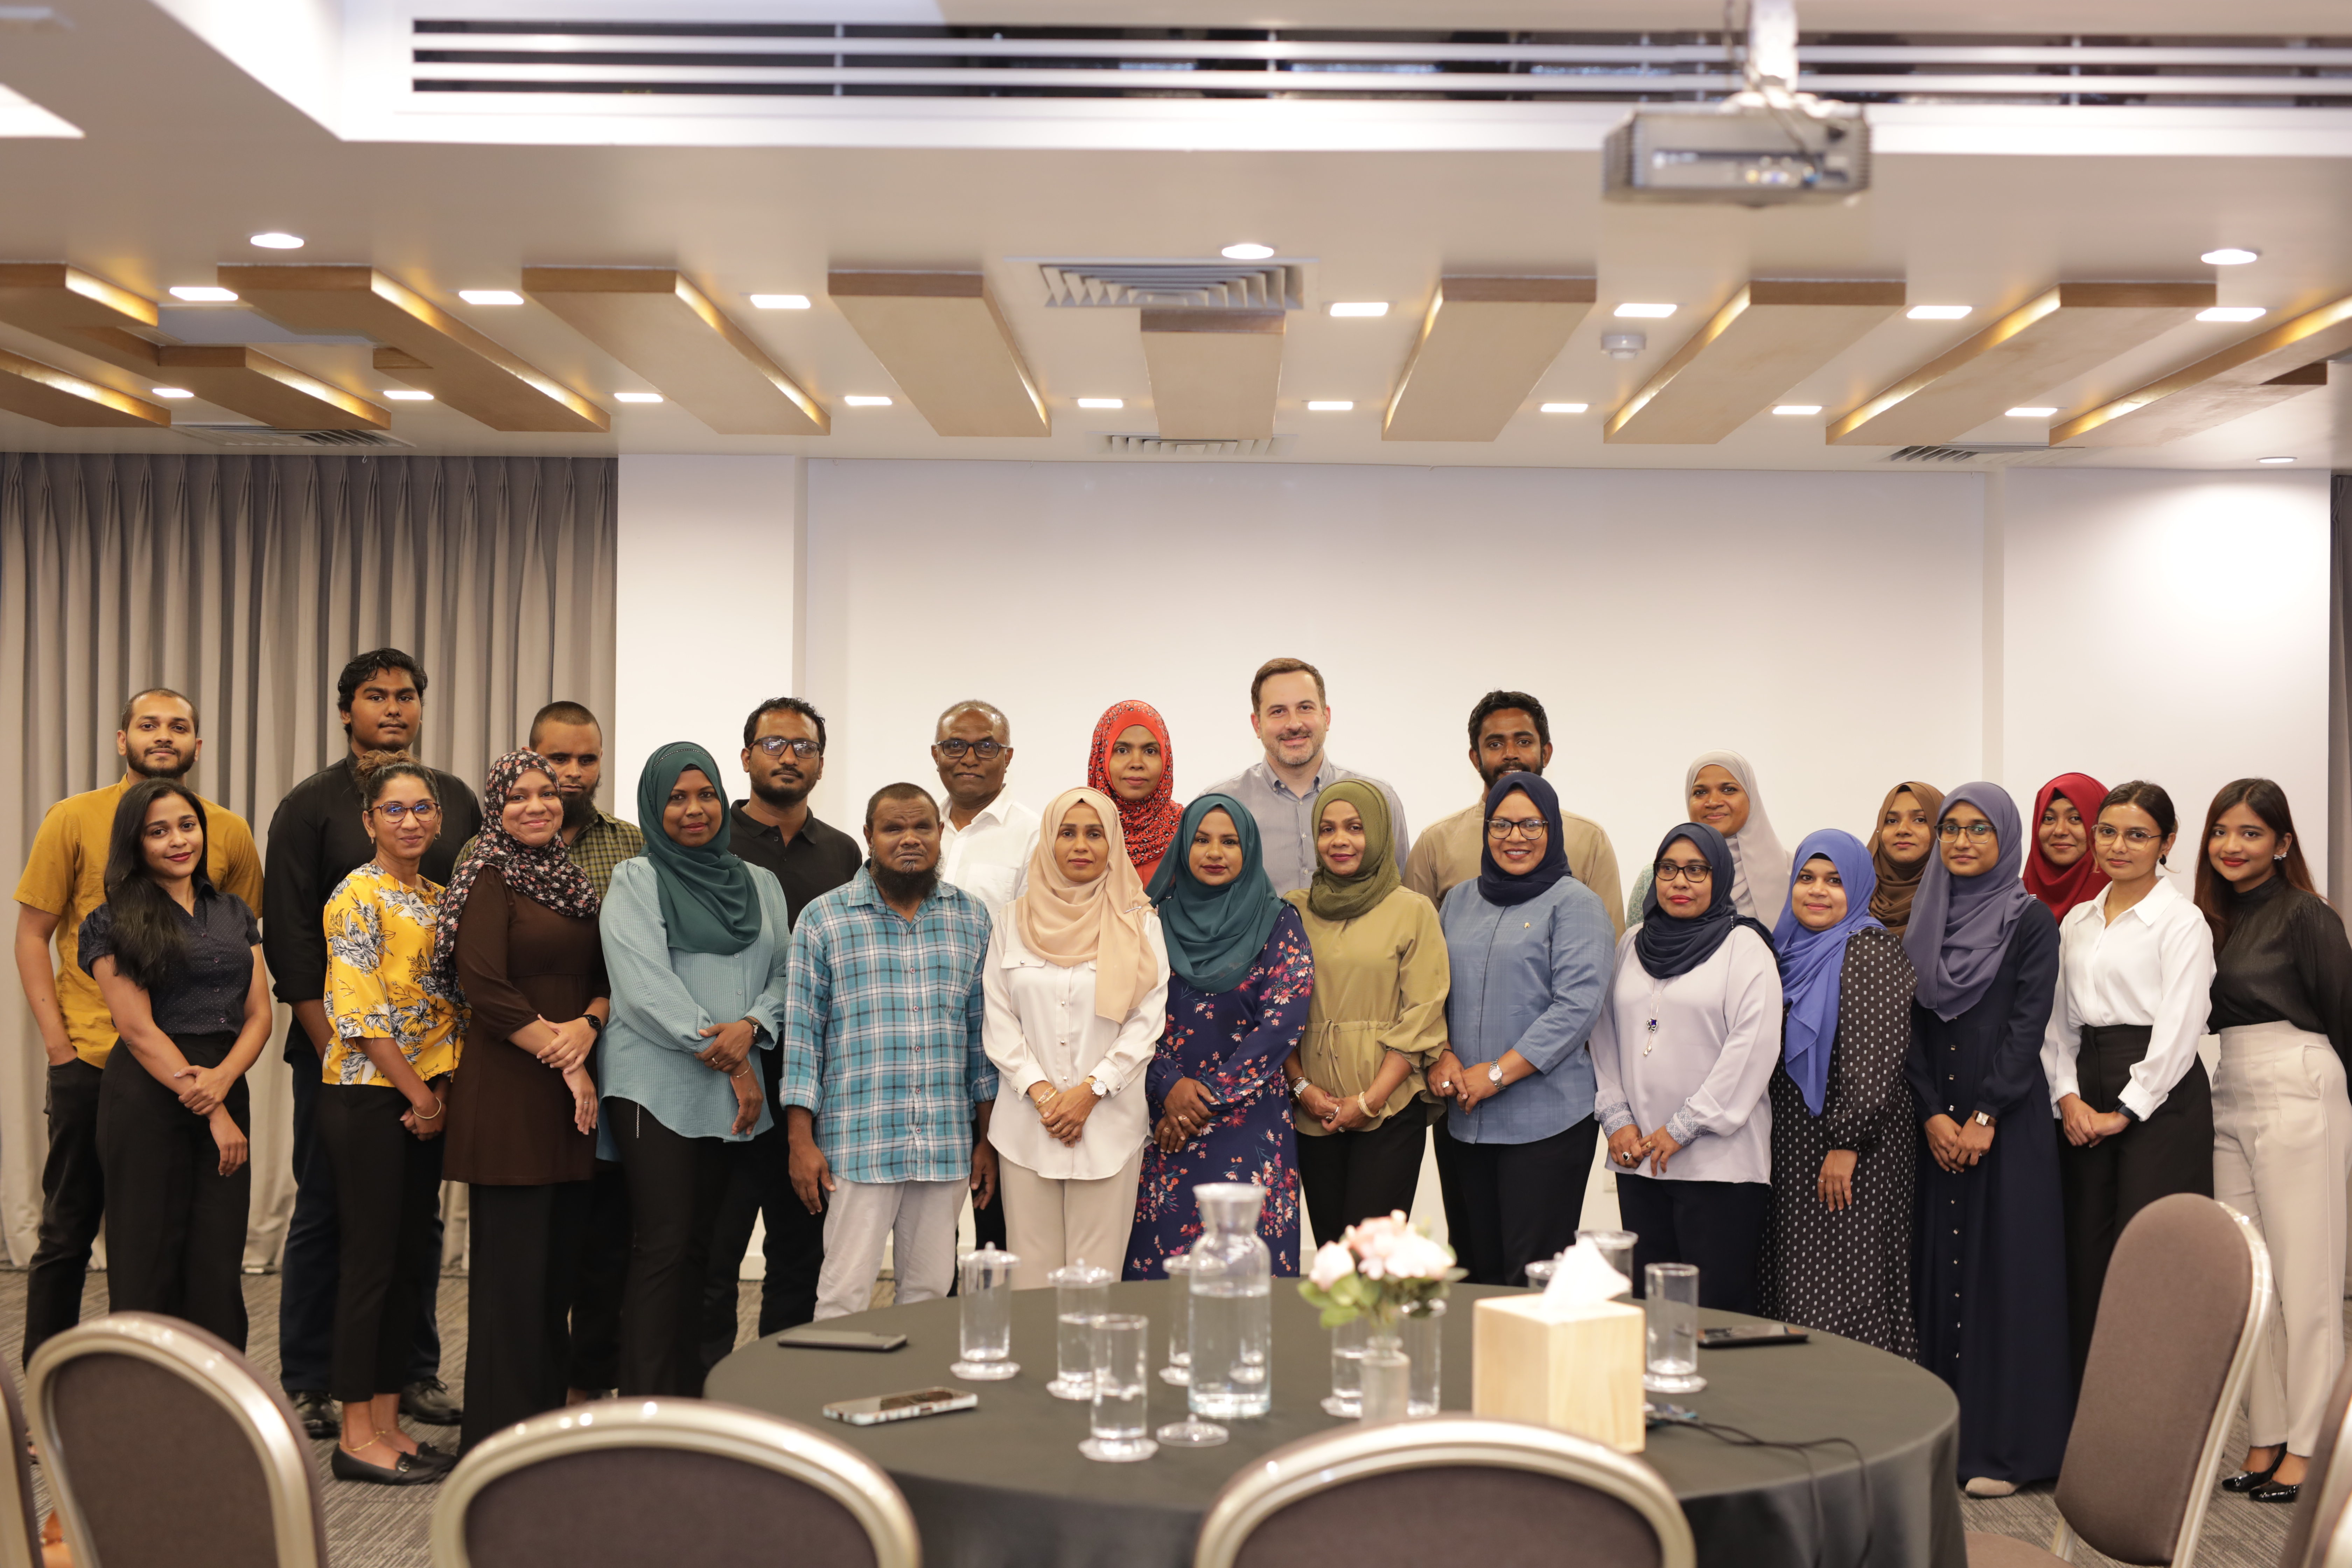 A group photo of CSO members participating in an event in Maldives 